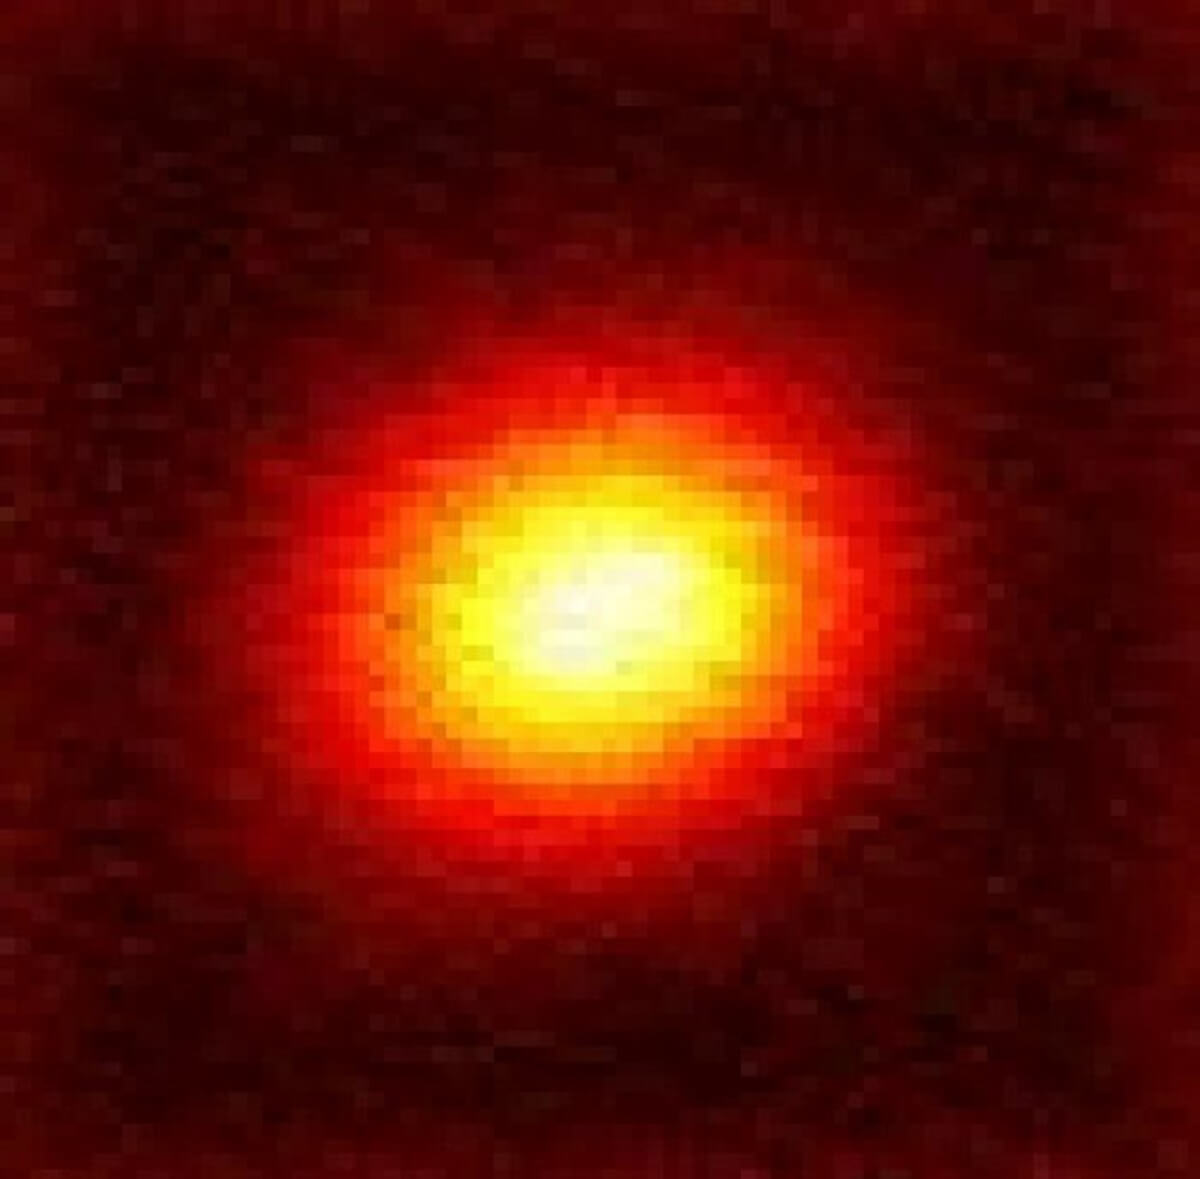 A tiny particle of polystyrene plastic as imaged by a new microscopic technique. It is about 200 nanometers across, or 200 billionths of a meter. 